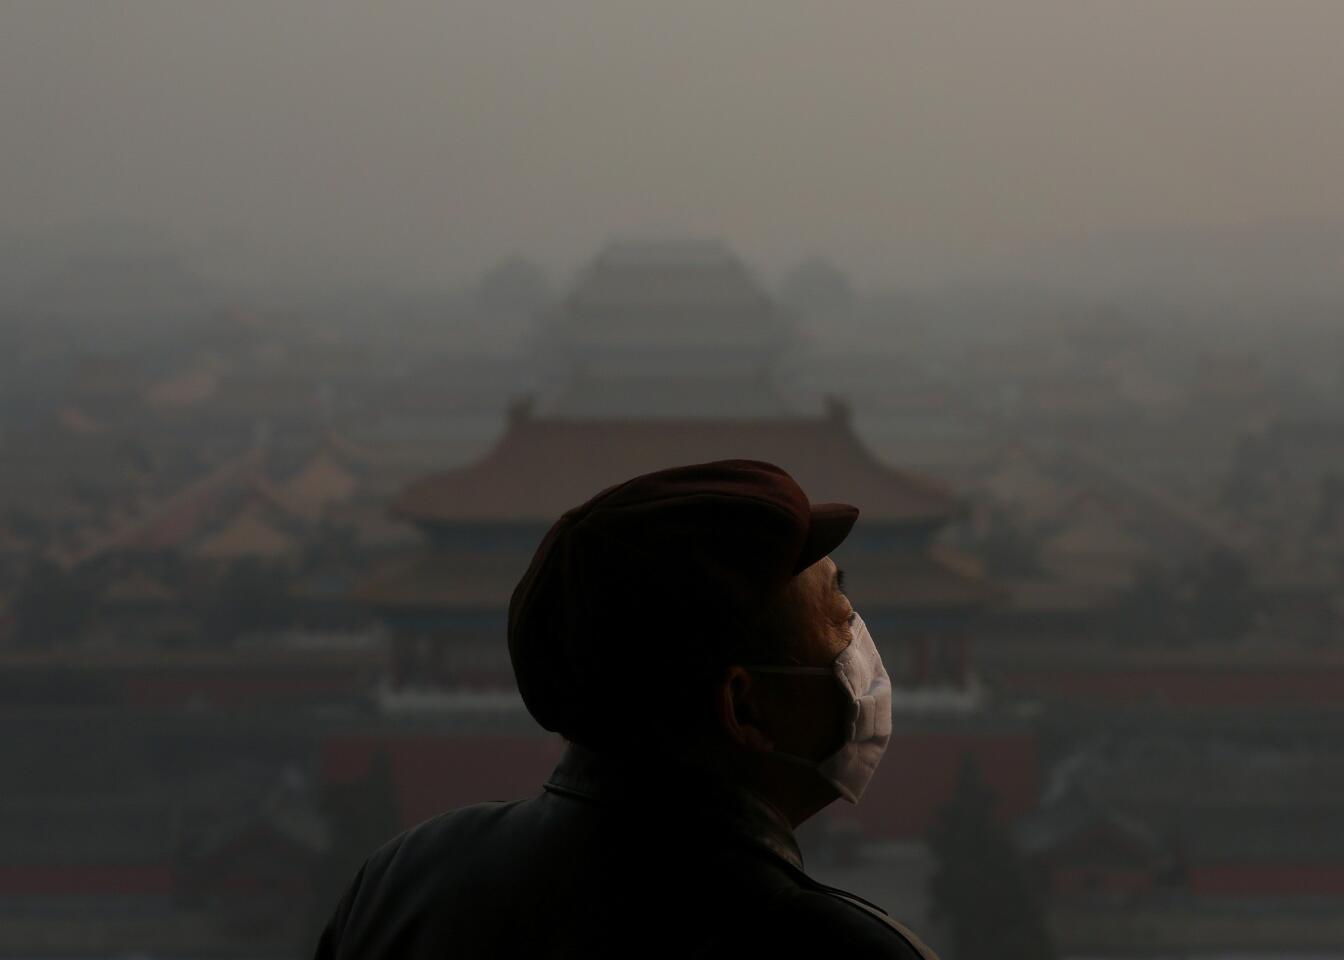 A tourist wearing the mask looks at the Forbidden City in Beijing as pollution covers it Jan. 16. Heavy smog shrouded Beijing as pollution reached hazardous levels days earlier.